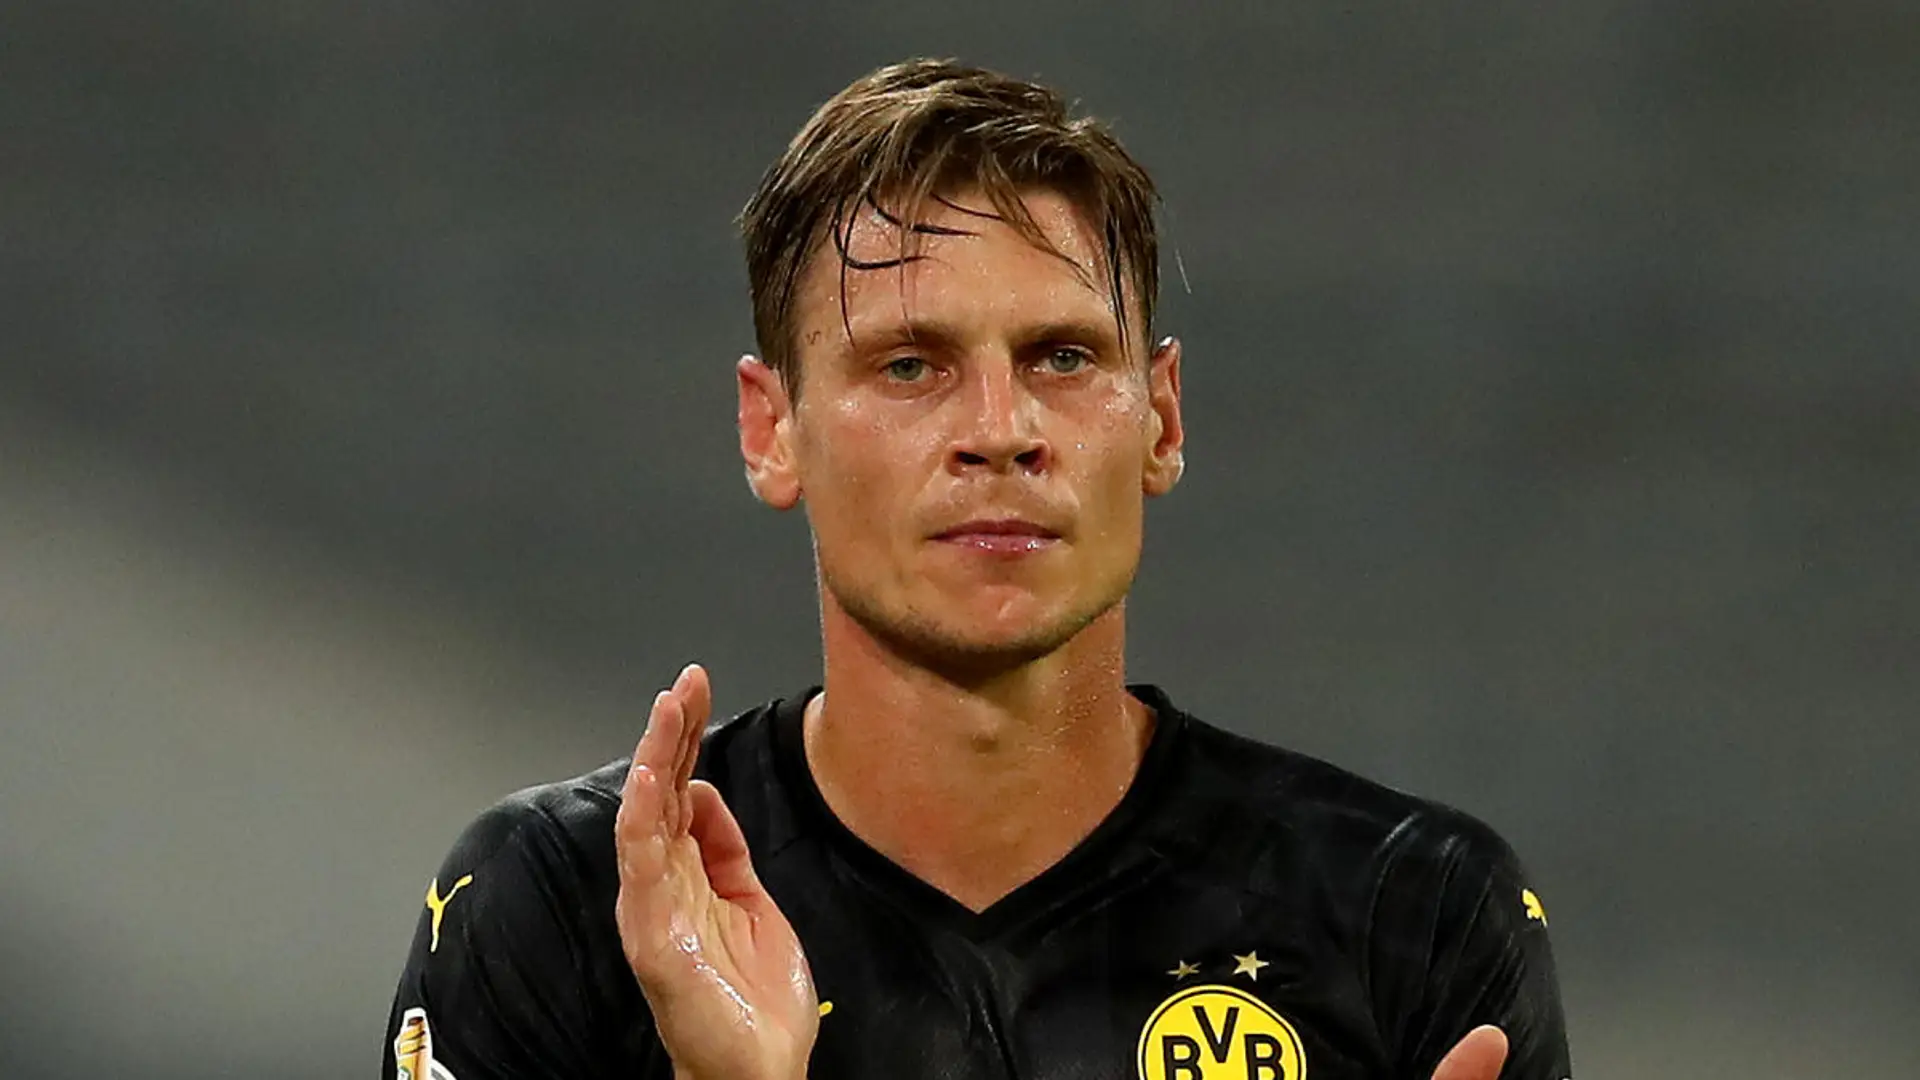 Dortmund's right-back Piszczek: 'Every year, I was being told I was going to Real Madrid'